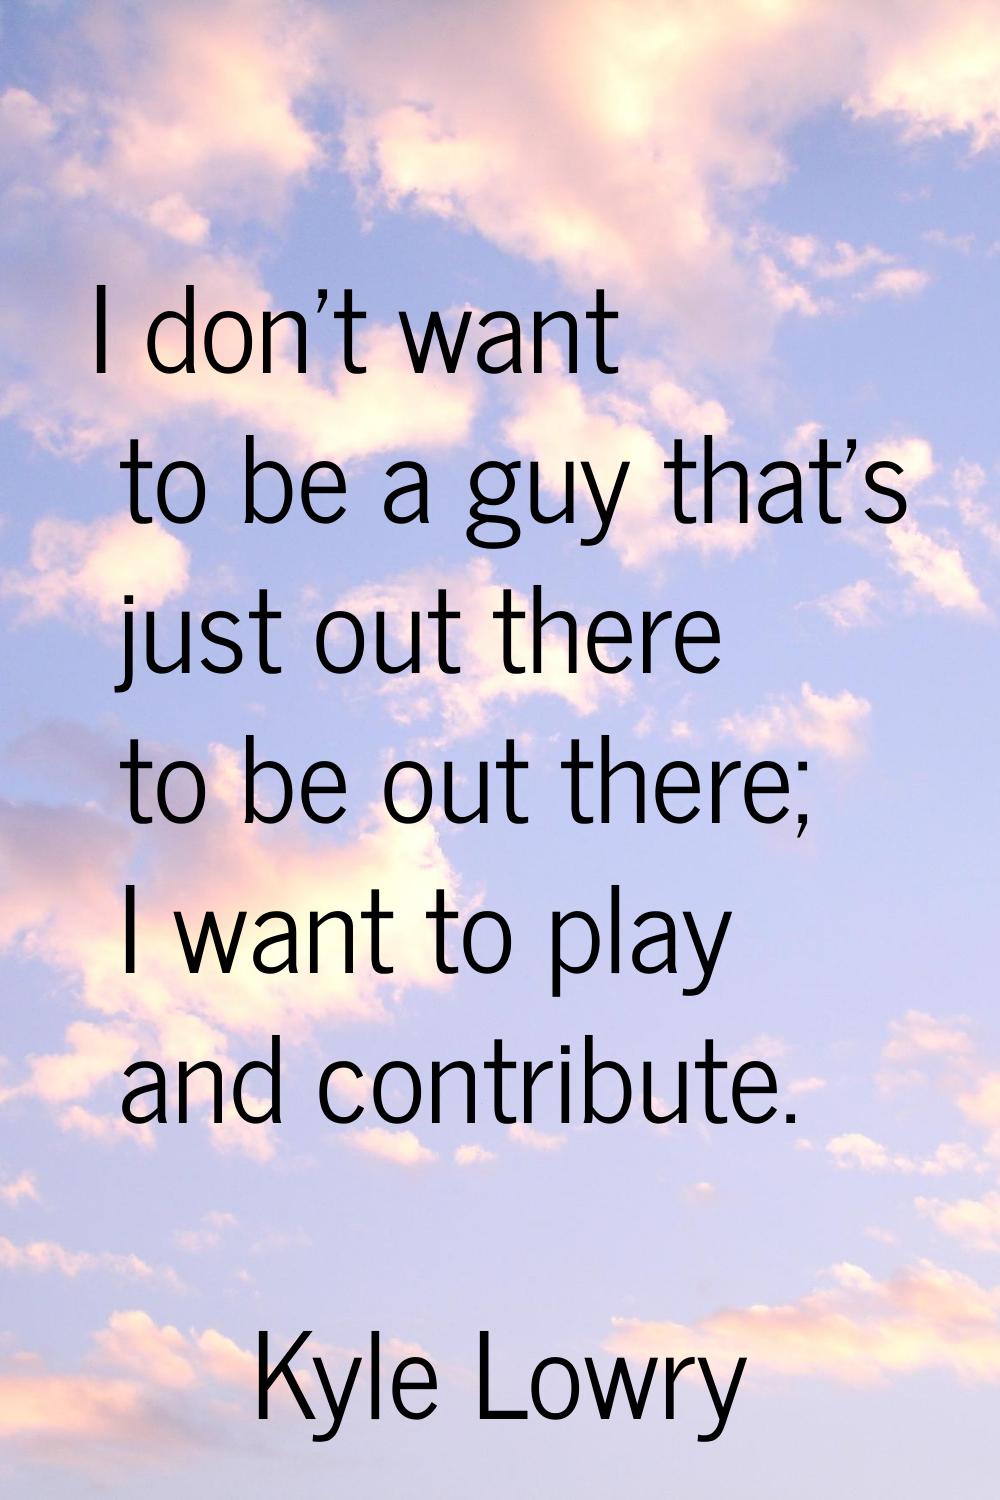 I don't want to be a guy that's just out there to be out there; I want to play and contribute.